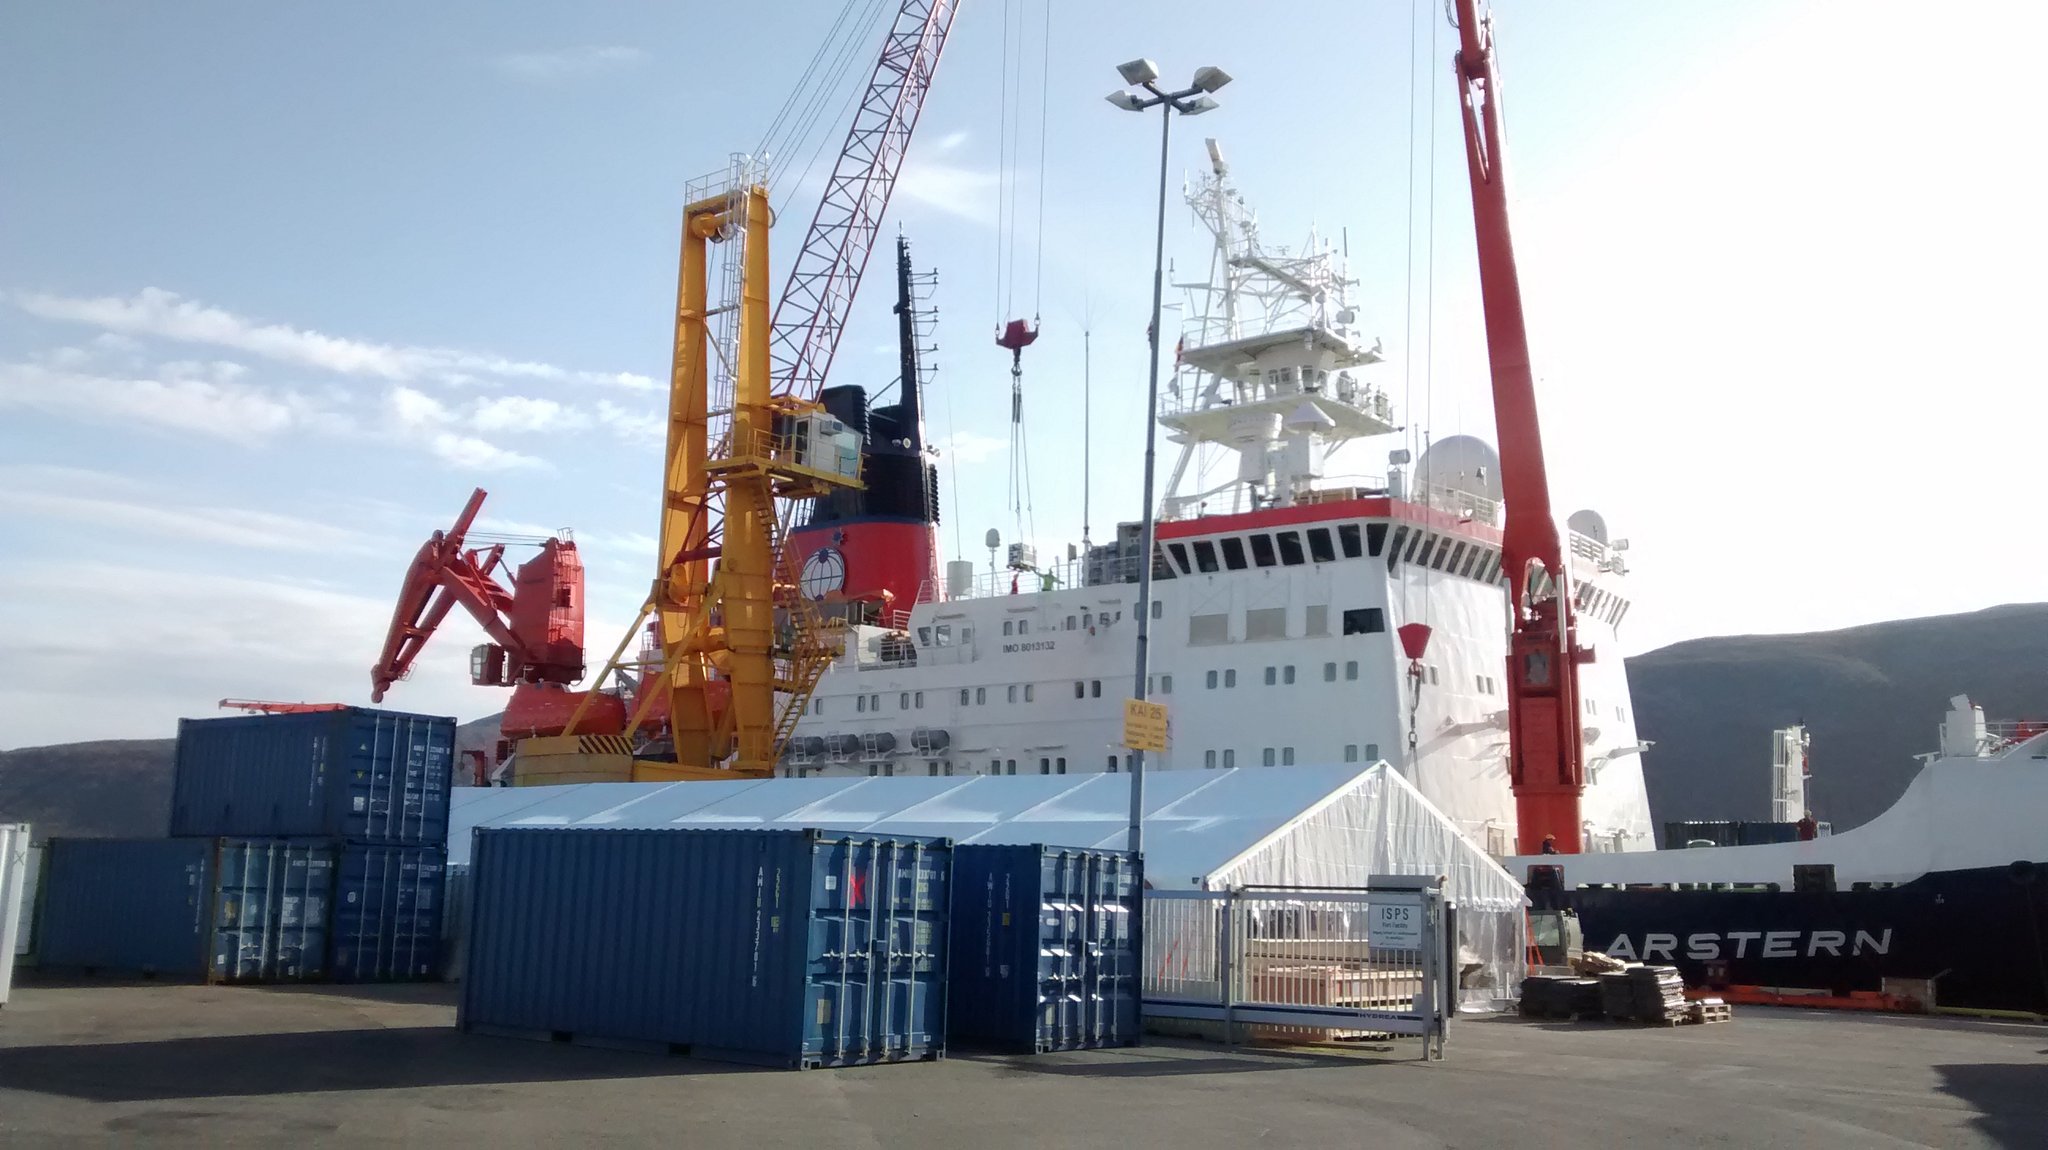 Orange crane moves blue shipping container onto a large white icebreaker ship